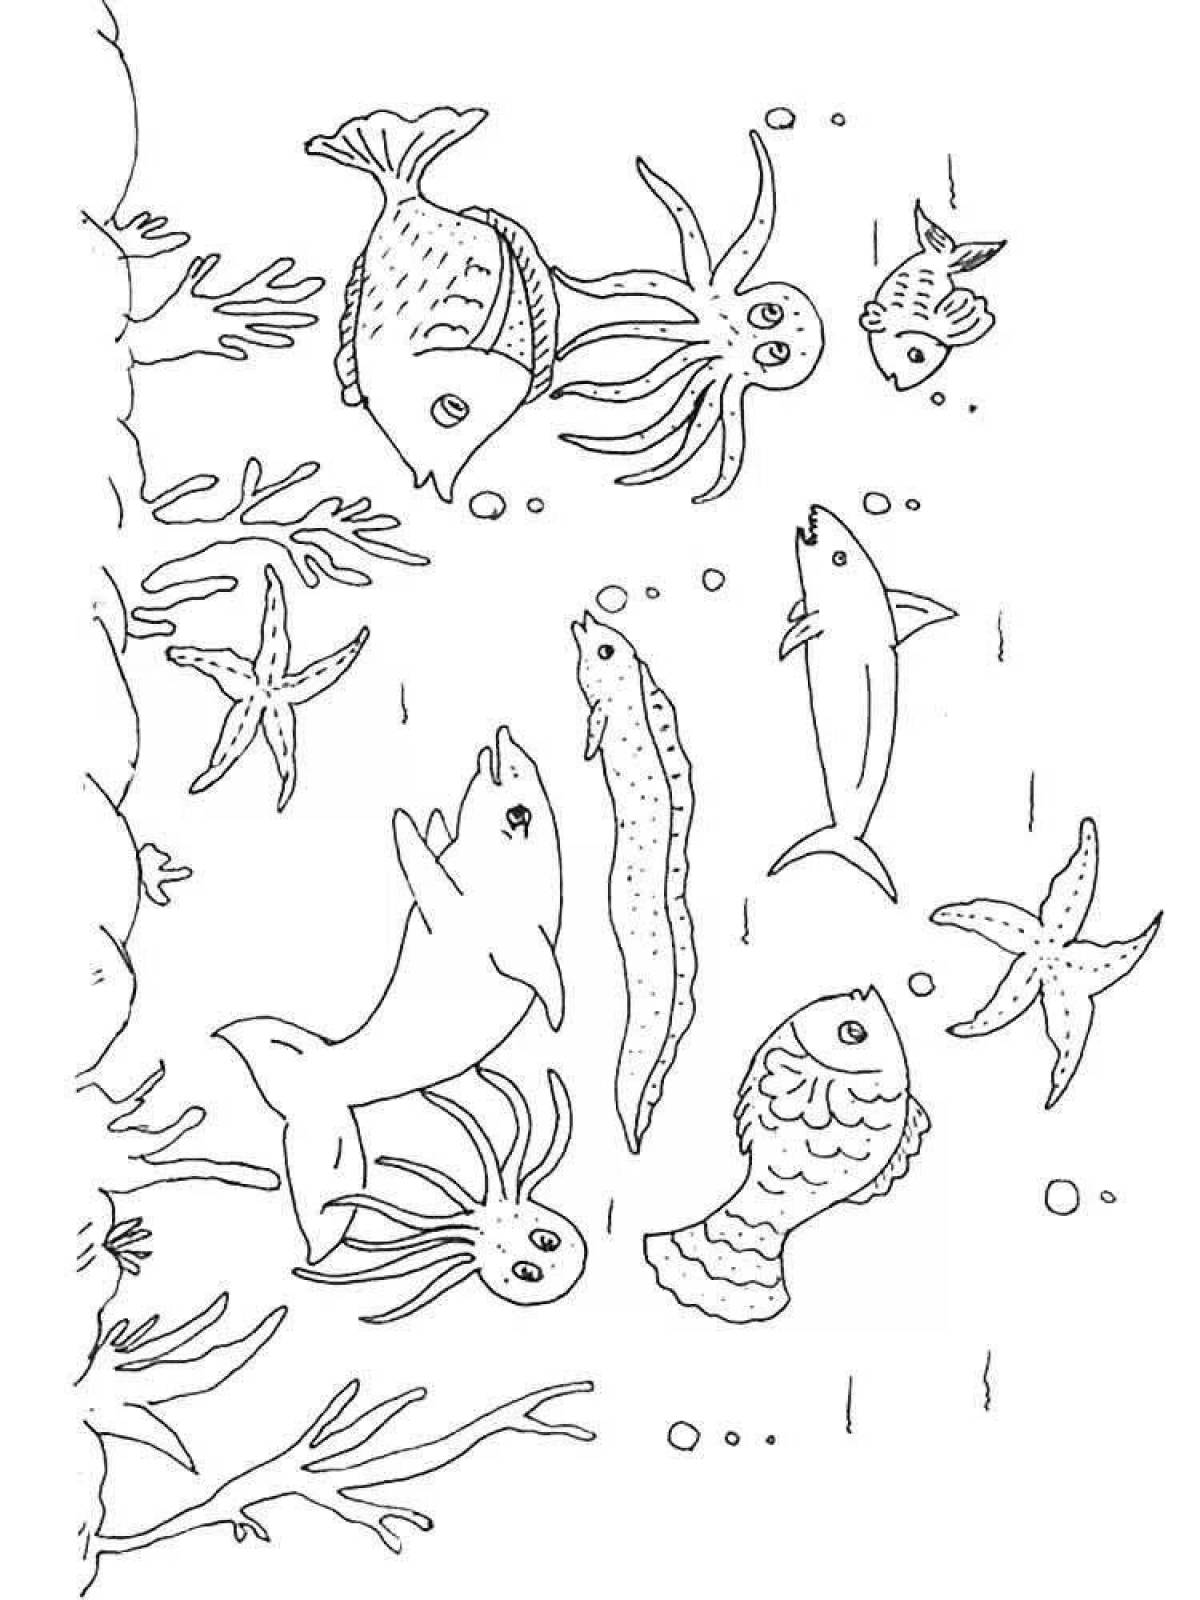 Coloring page generous sea fish